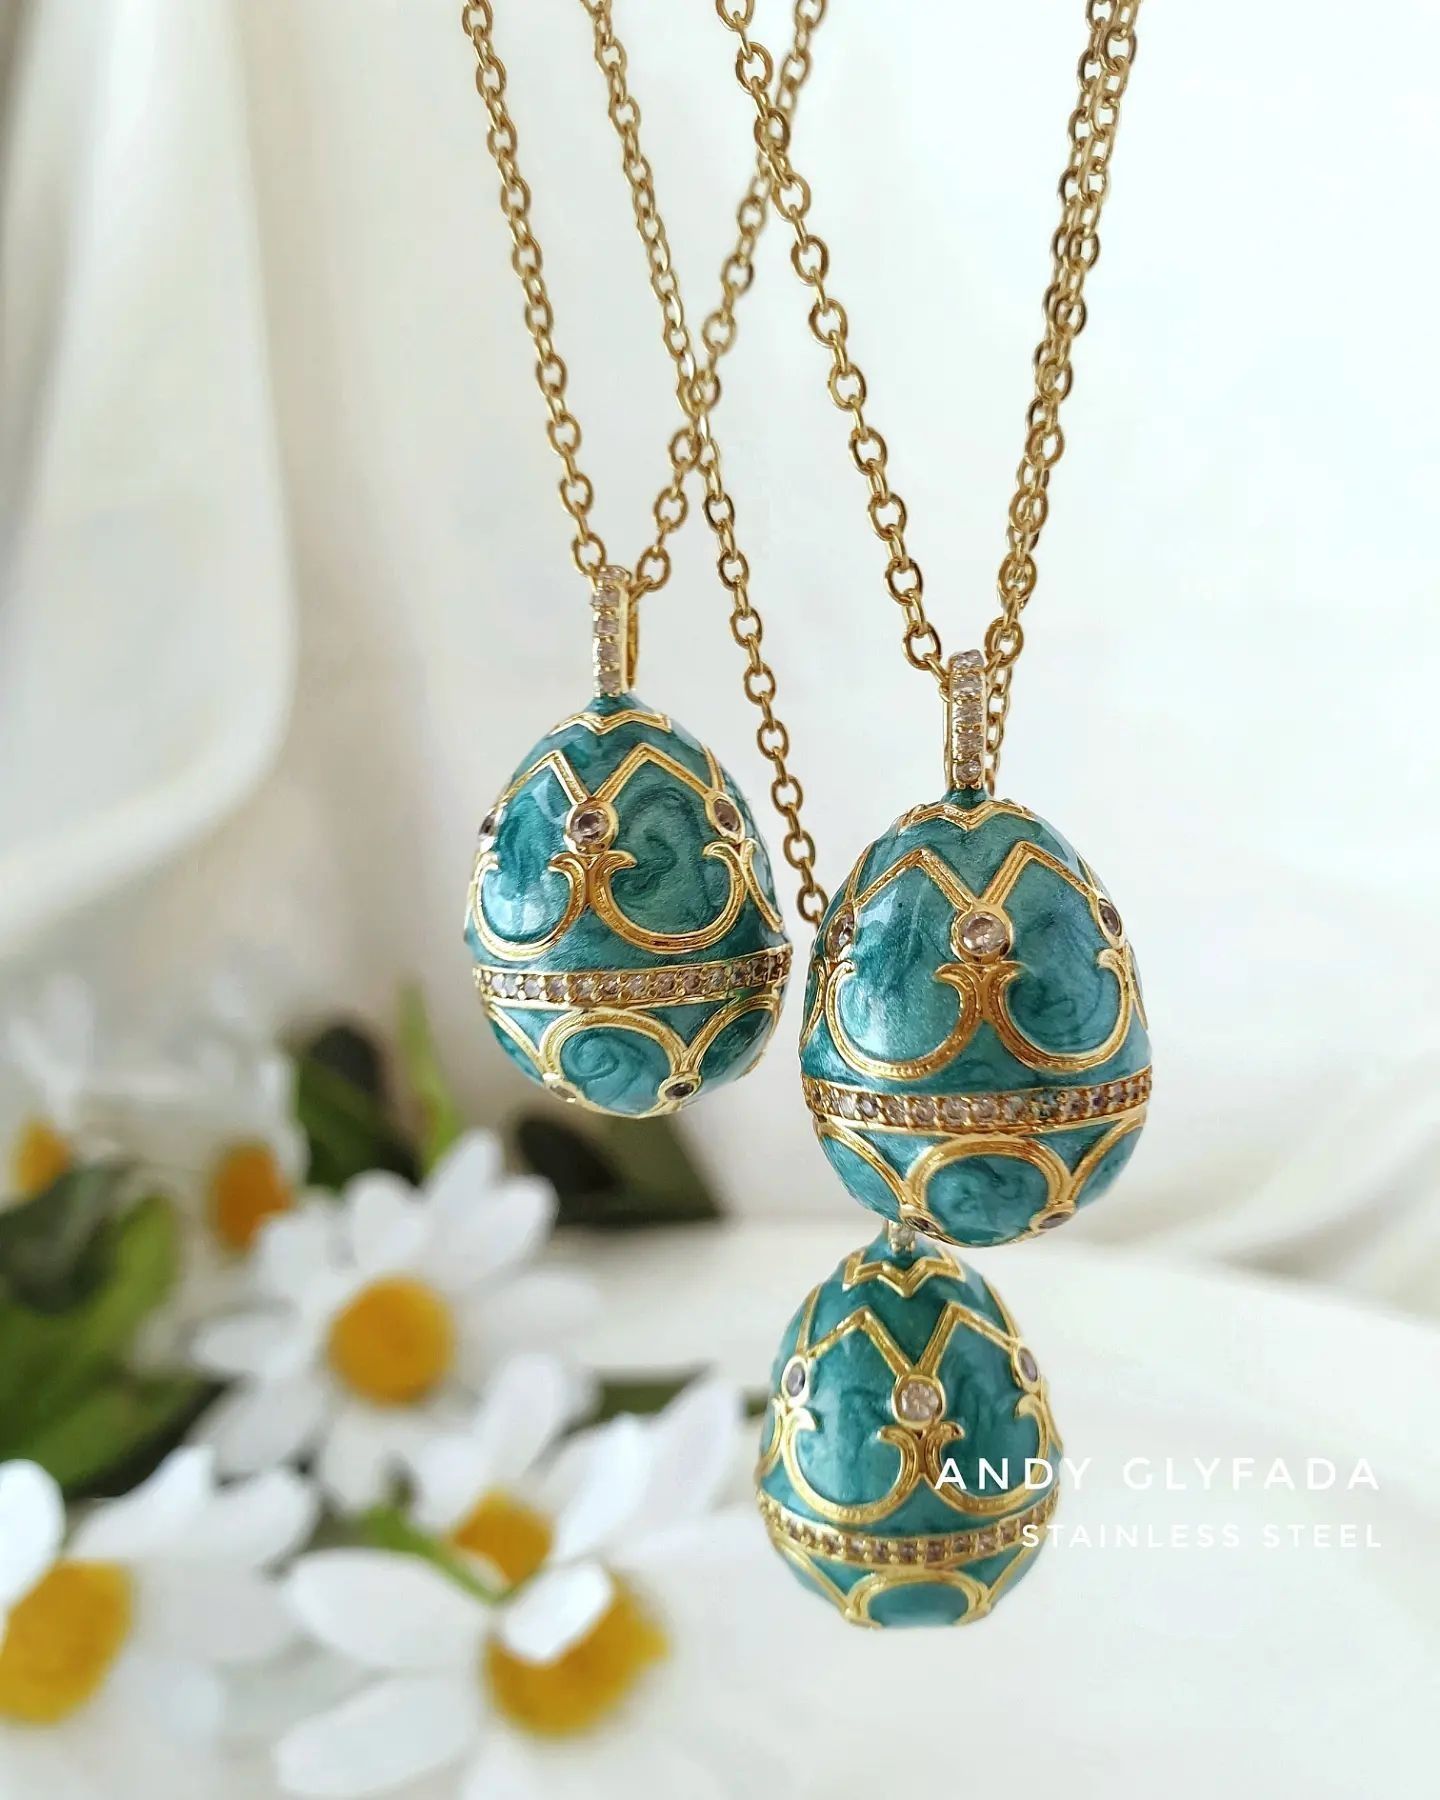 Carved Oval Enamel Egg Necklace with Zircons and Stainless Steel Chain